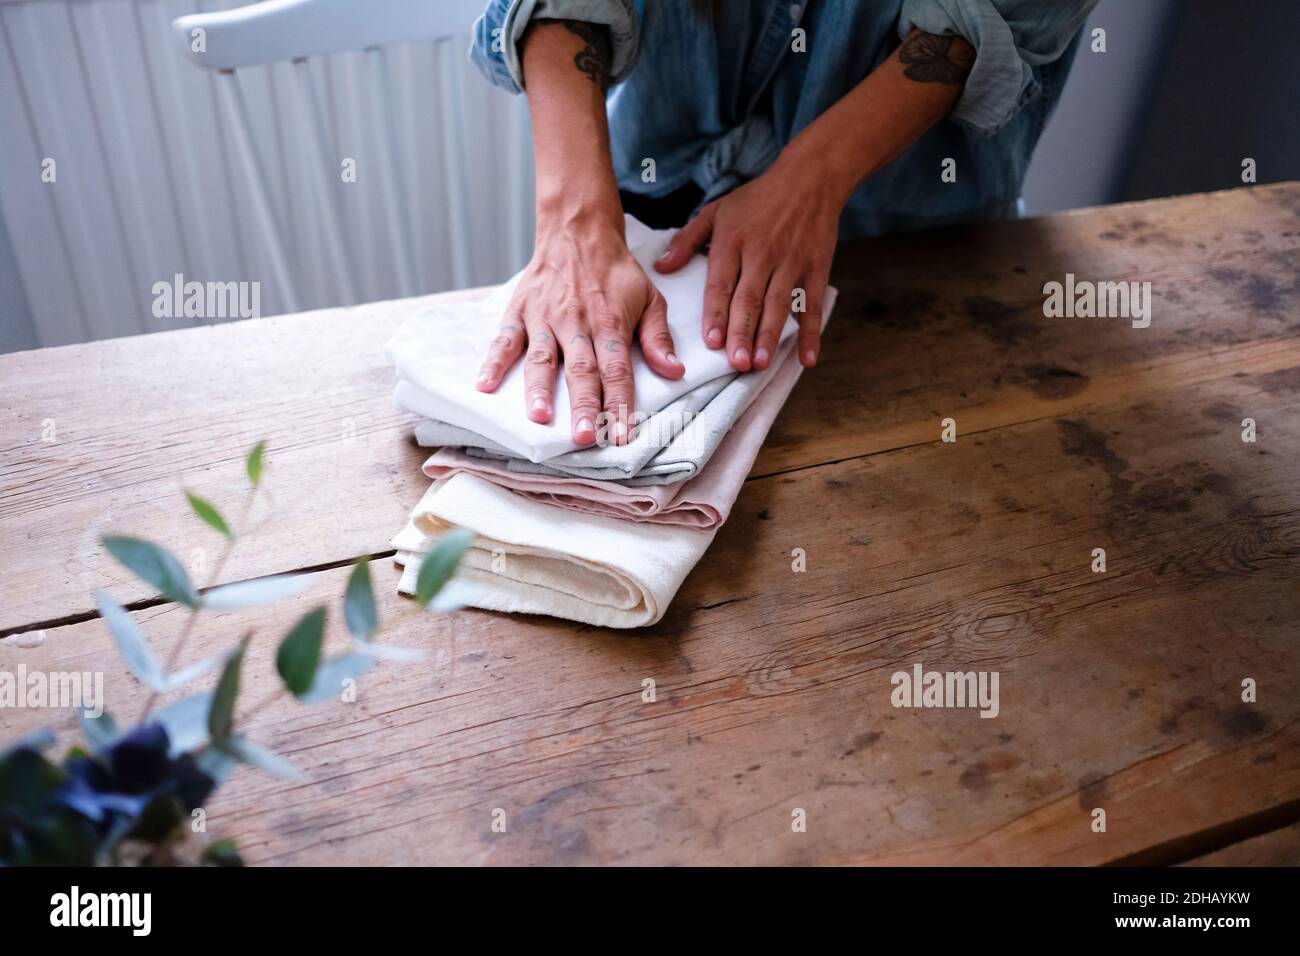 Midsection of woman folding napkins while standing at wooden table in kitchen Stock Photo